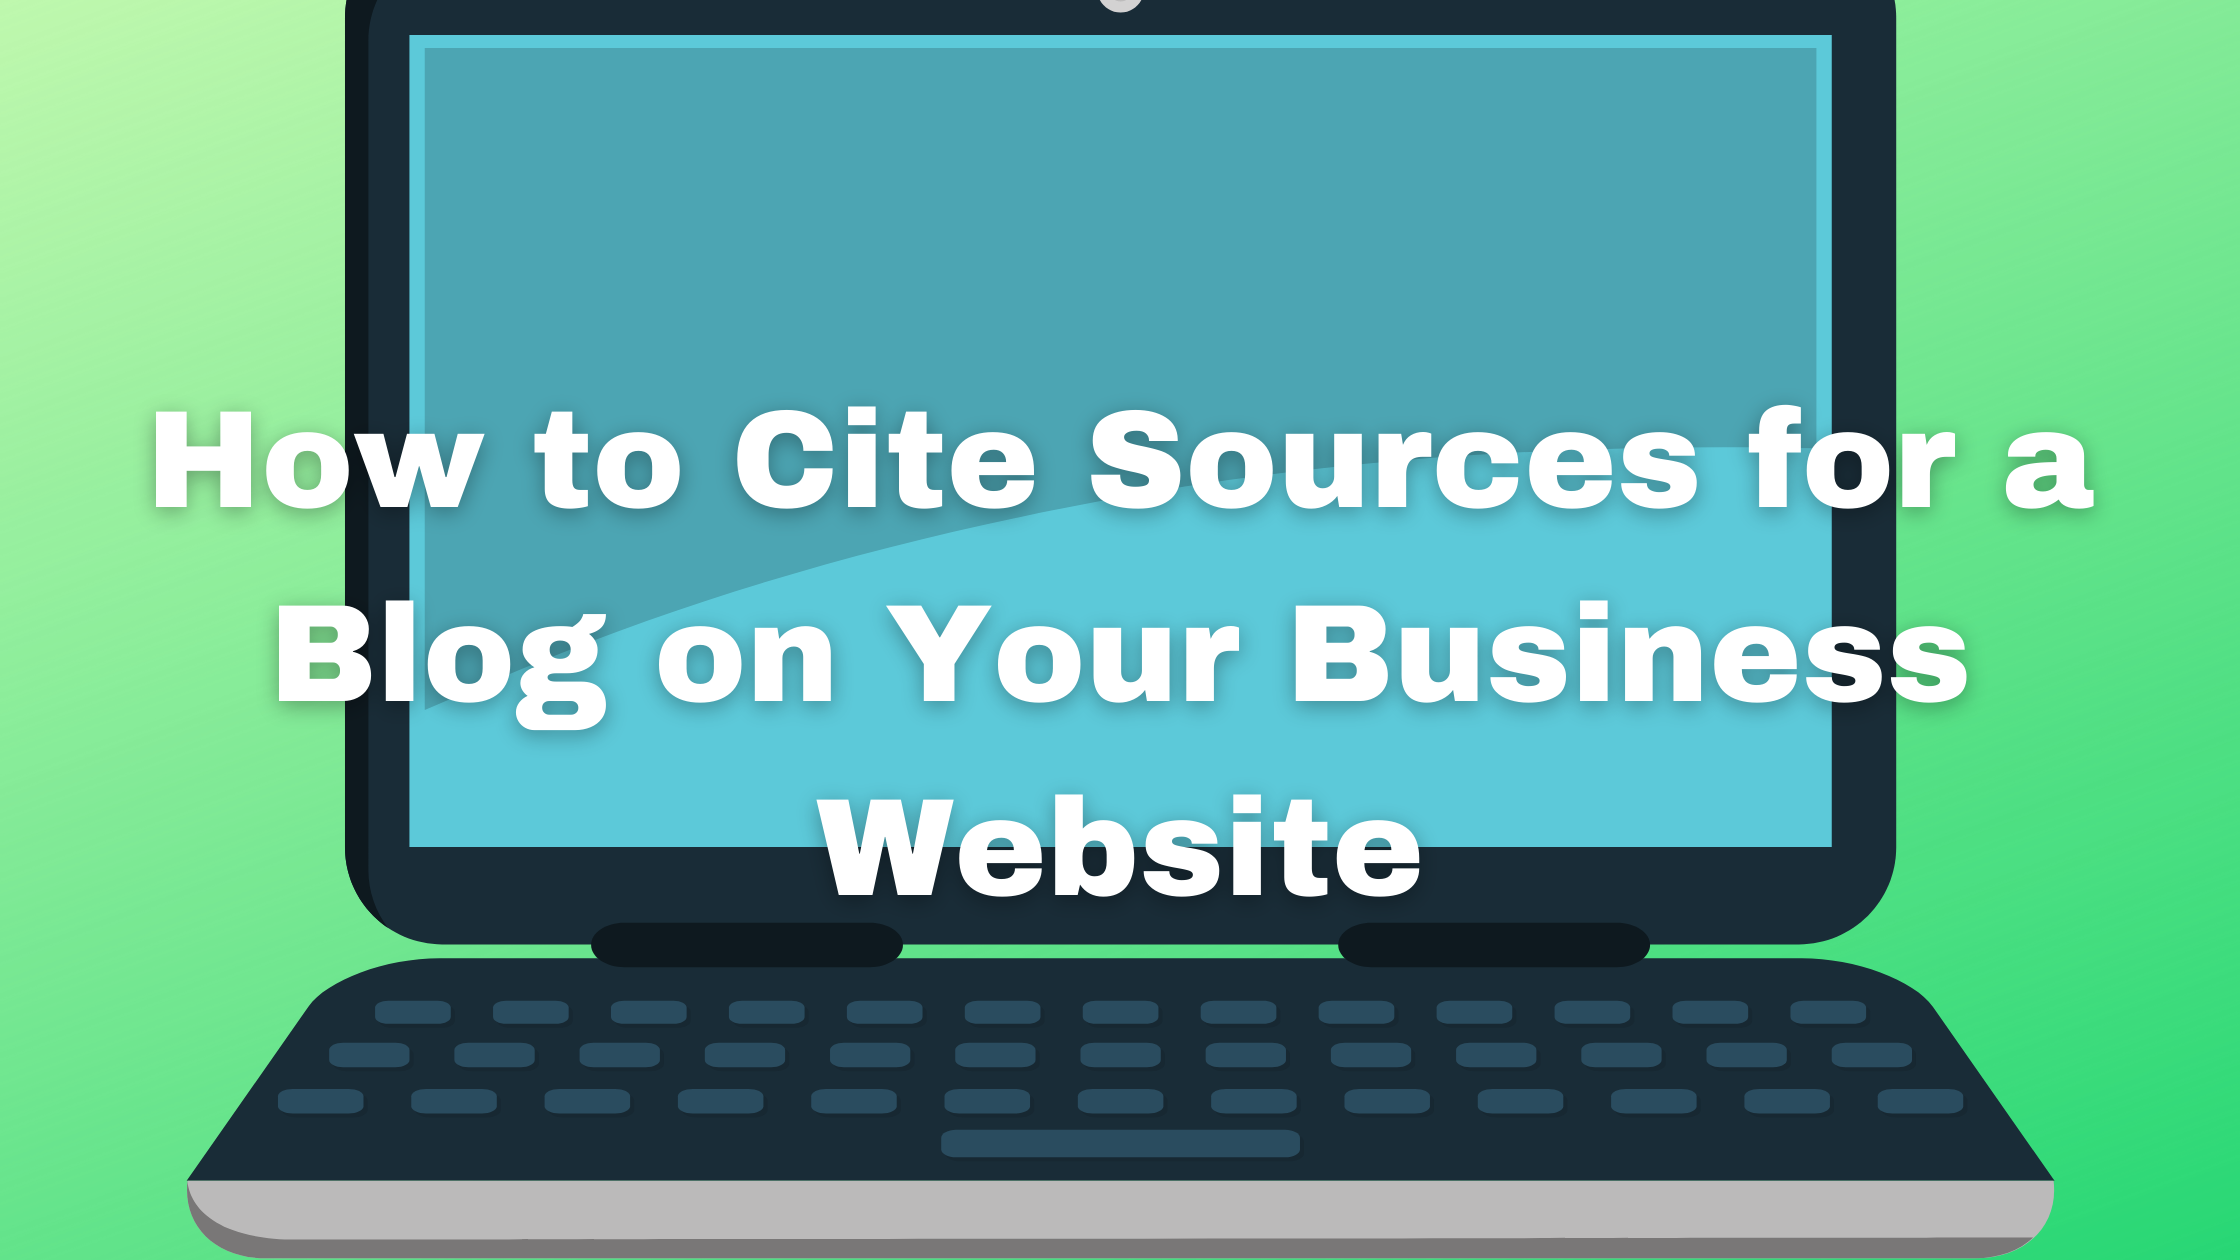 How to Cite Sources for a Blog on Your Business Website